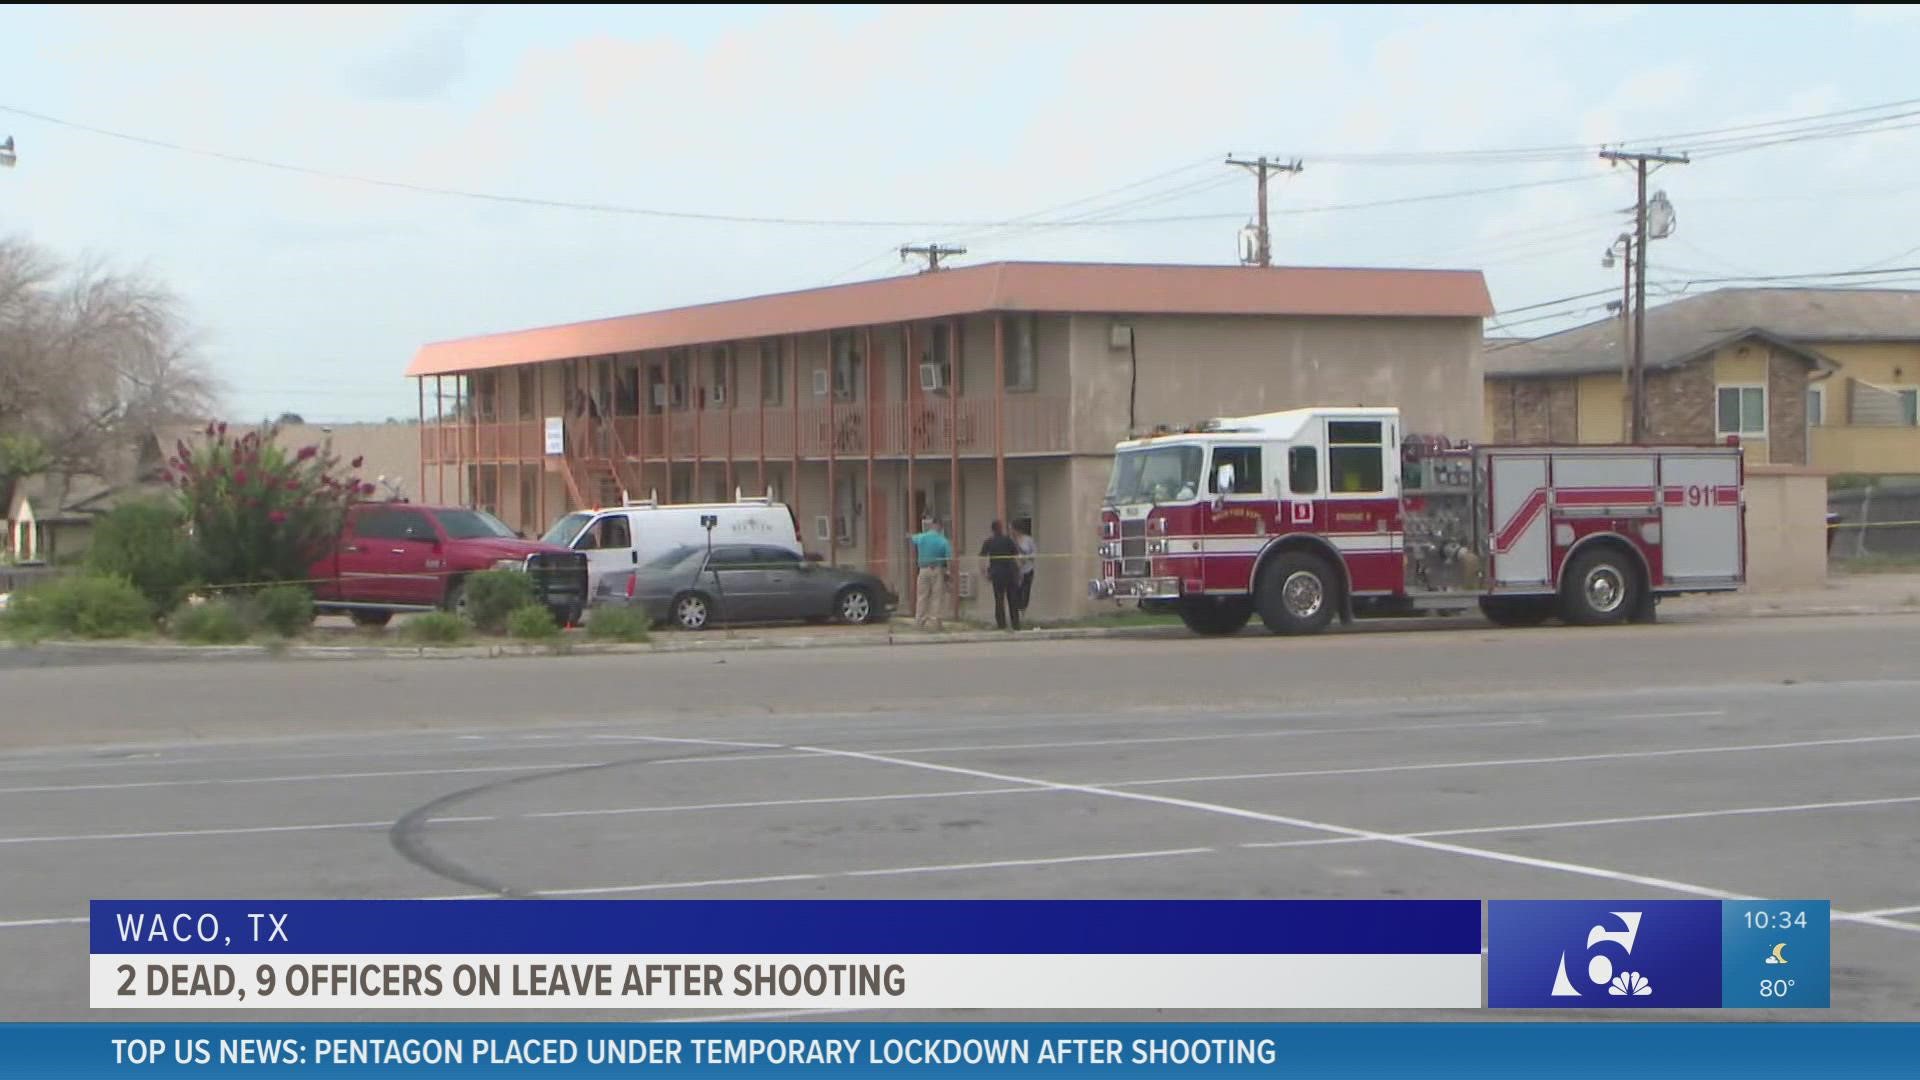 Officials said Alva Stem, Jr., 65, was the man killed by a suspect at the Rex-Plex apartment complex Tuesday morning.